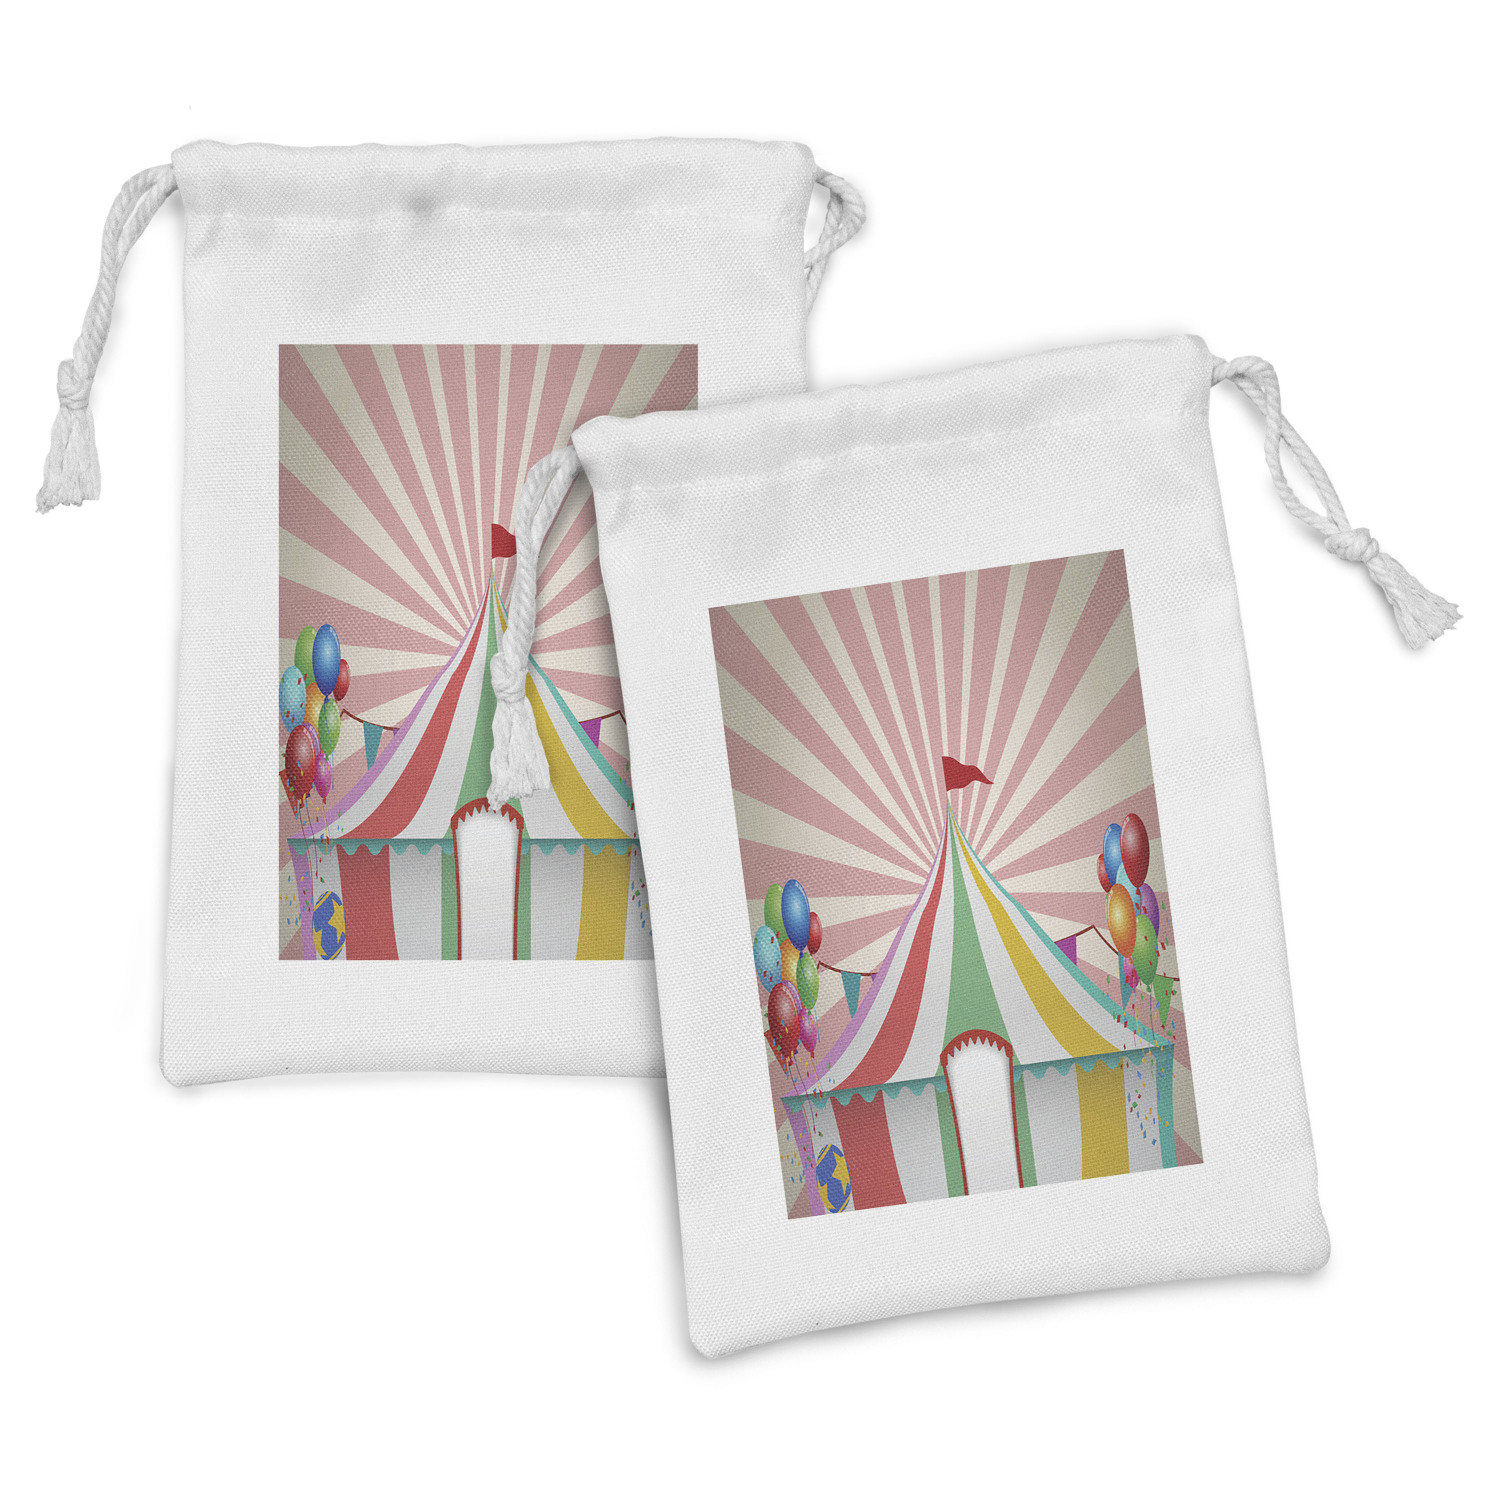 Circus Fabric Pouch Set of 2, Old Style Vintage Circus Tent with Balloons  Carnival Celebration Performance Animals, Drawstring Bag for Toiletries